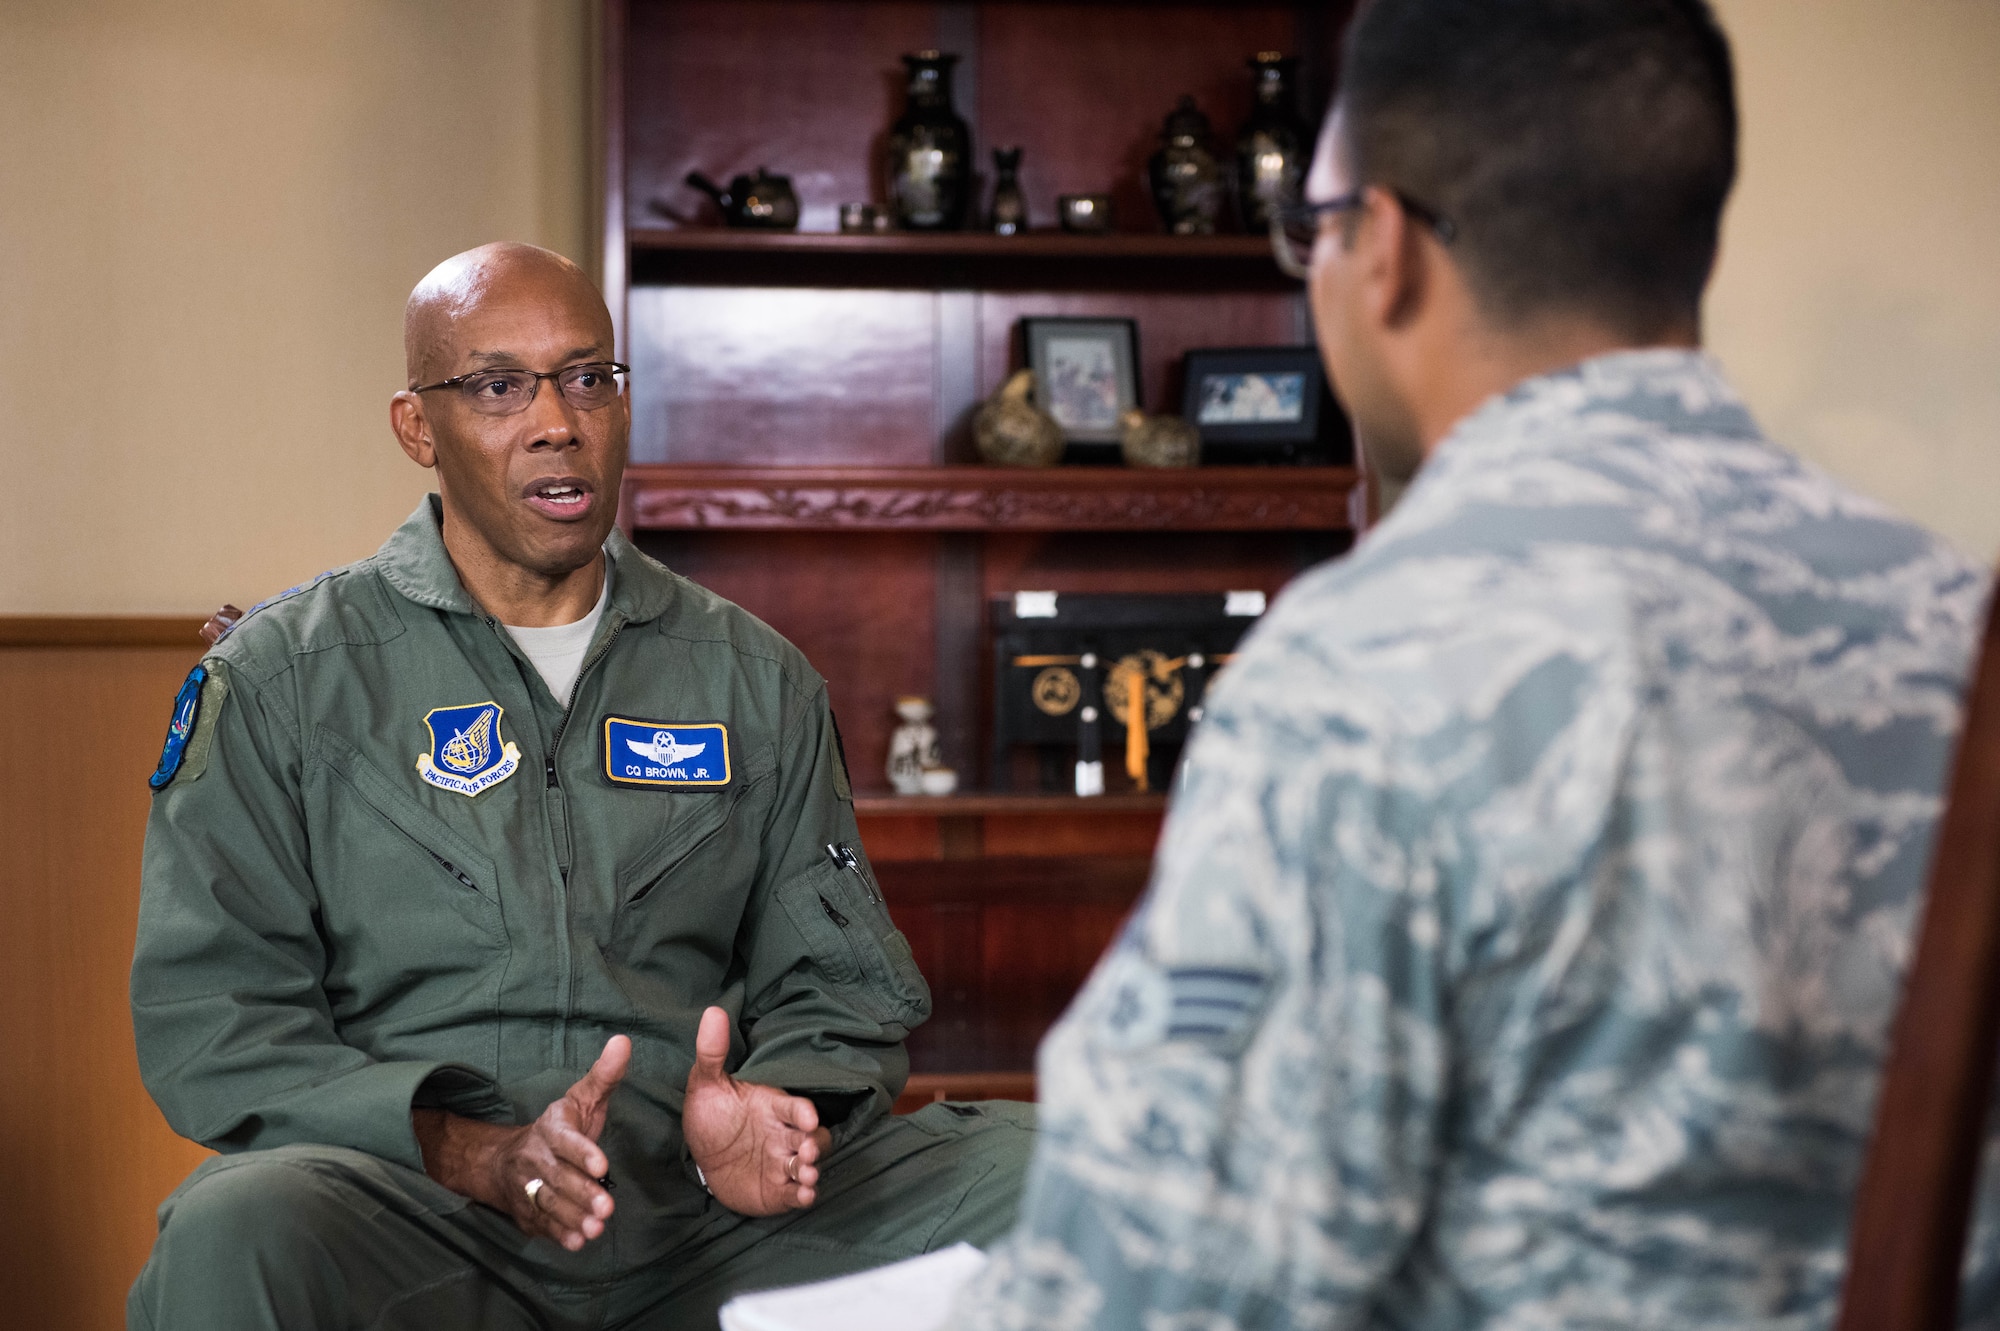 Gen. CQ Brown, Jr., Pacific Air Forces commander, is interviewed by Senior Airman Dhruv Gopinath, American Forces Network Japan, at Yokota Air Base, Japan, Aug. 8, 2018. During the interview, Brown discussed the importance of the U.S.-Japan alliance and the critical role Airmen play in ensuring a free and open Indo-Pacific region. ((U.S. Air Force photo by Staff Sgt. Hailey Haux)